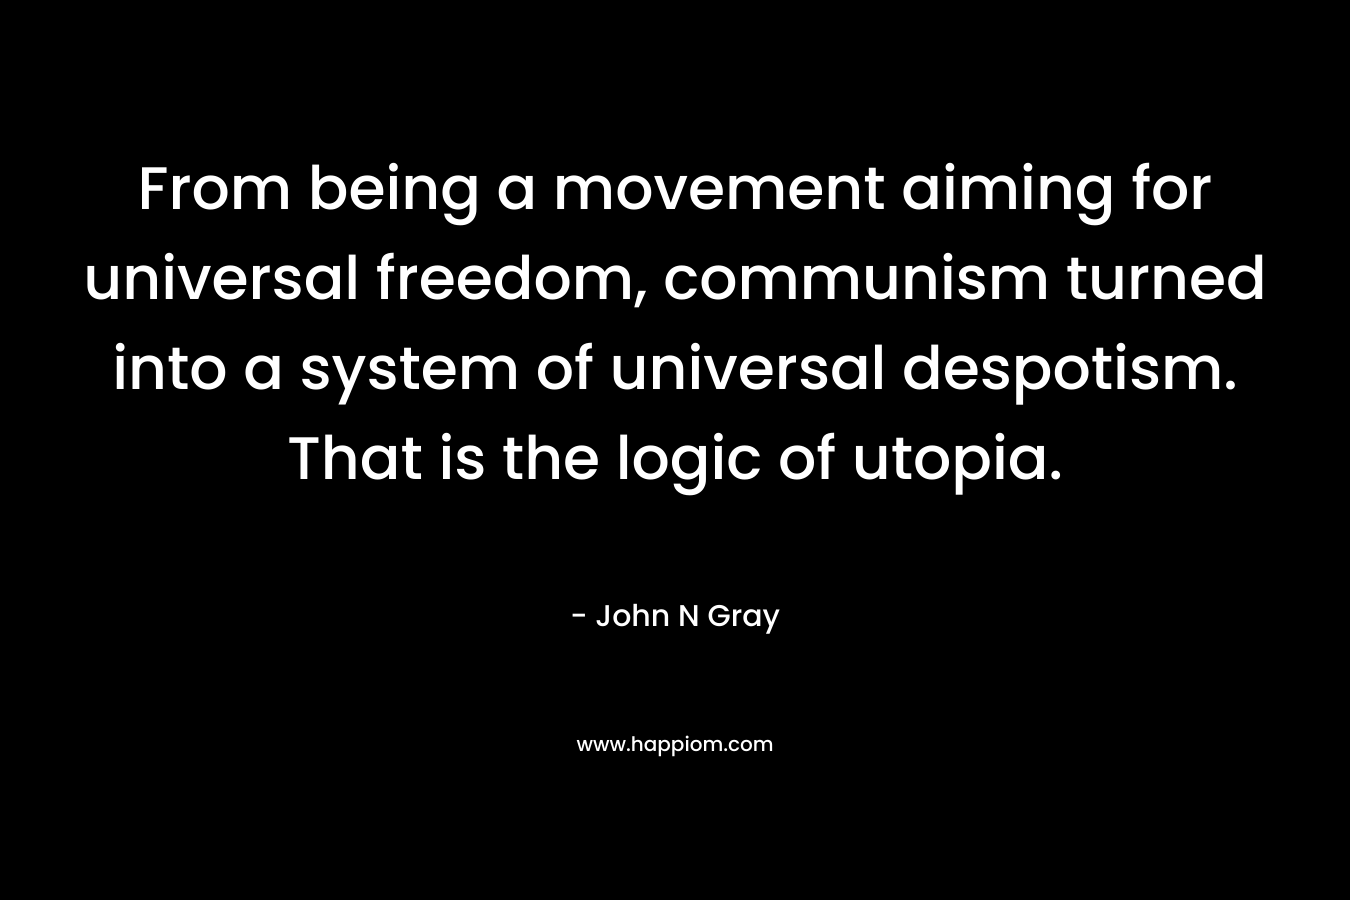 From being a movement aiming for universal freedom, communism turned into a system of universal despotism. That is the logic of utopia.